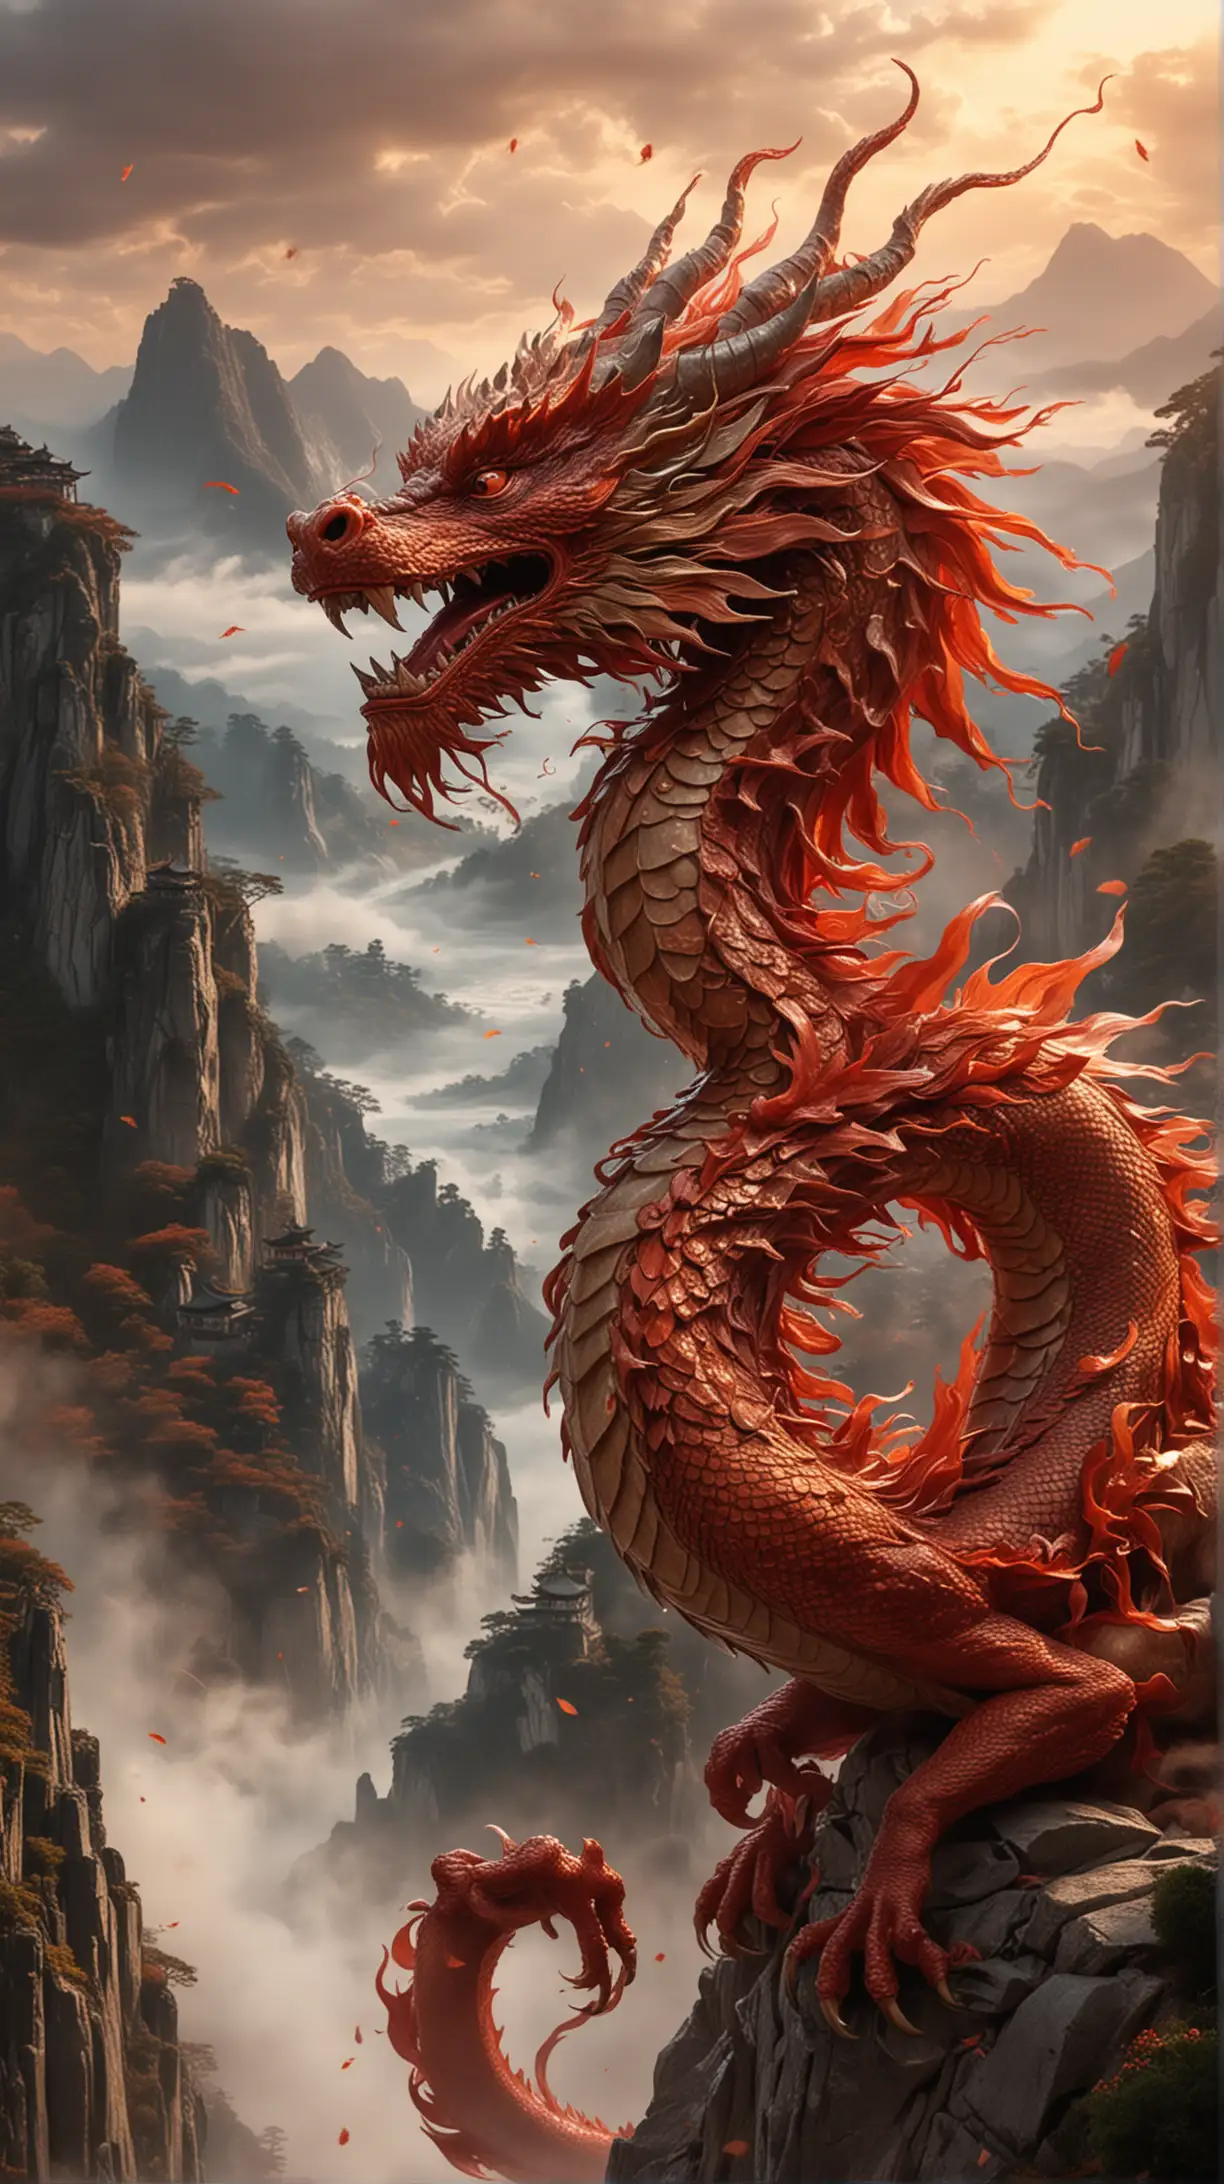 Capture the awe-inspiring presence of a Chinese red dragon in a single image, symbolizing power, majesty, and cultural heritage. Set against a backdrop of rolling hills or mist-shrouded mountains, the dragon emerges from swirling clouds with its serpentine body coiled and wings outstretched. The dragon's scales shimmer with vibrant shades of crimson and gold, while wisps of fiery breath curl around its snout. Its piercing gaze meets the viewer's with an aura of ancient wisdom and strength. Through dynamic composition and rich symbolism, evoke a sense of wonder and reverence for this iconic creature of Chinese mythology.
Hyper realistic